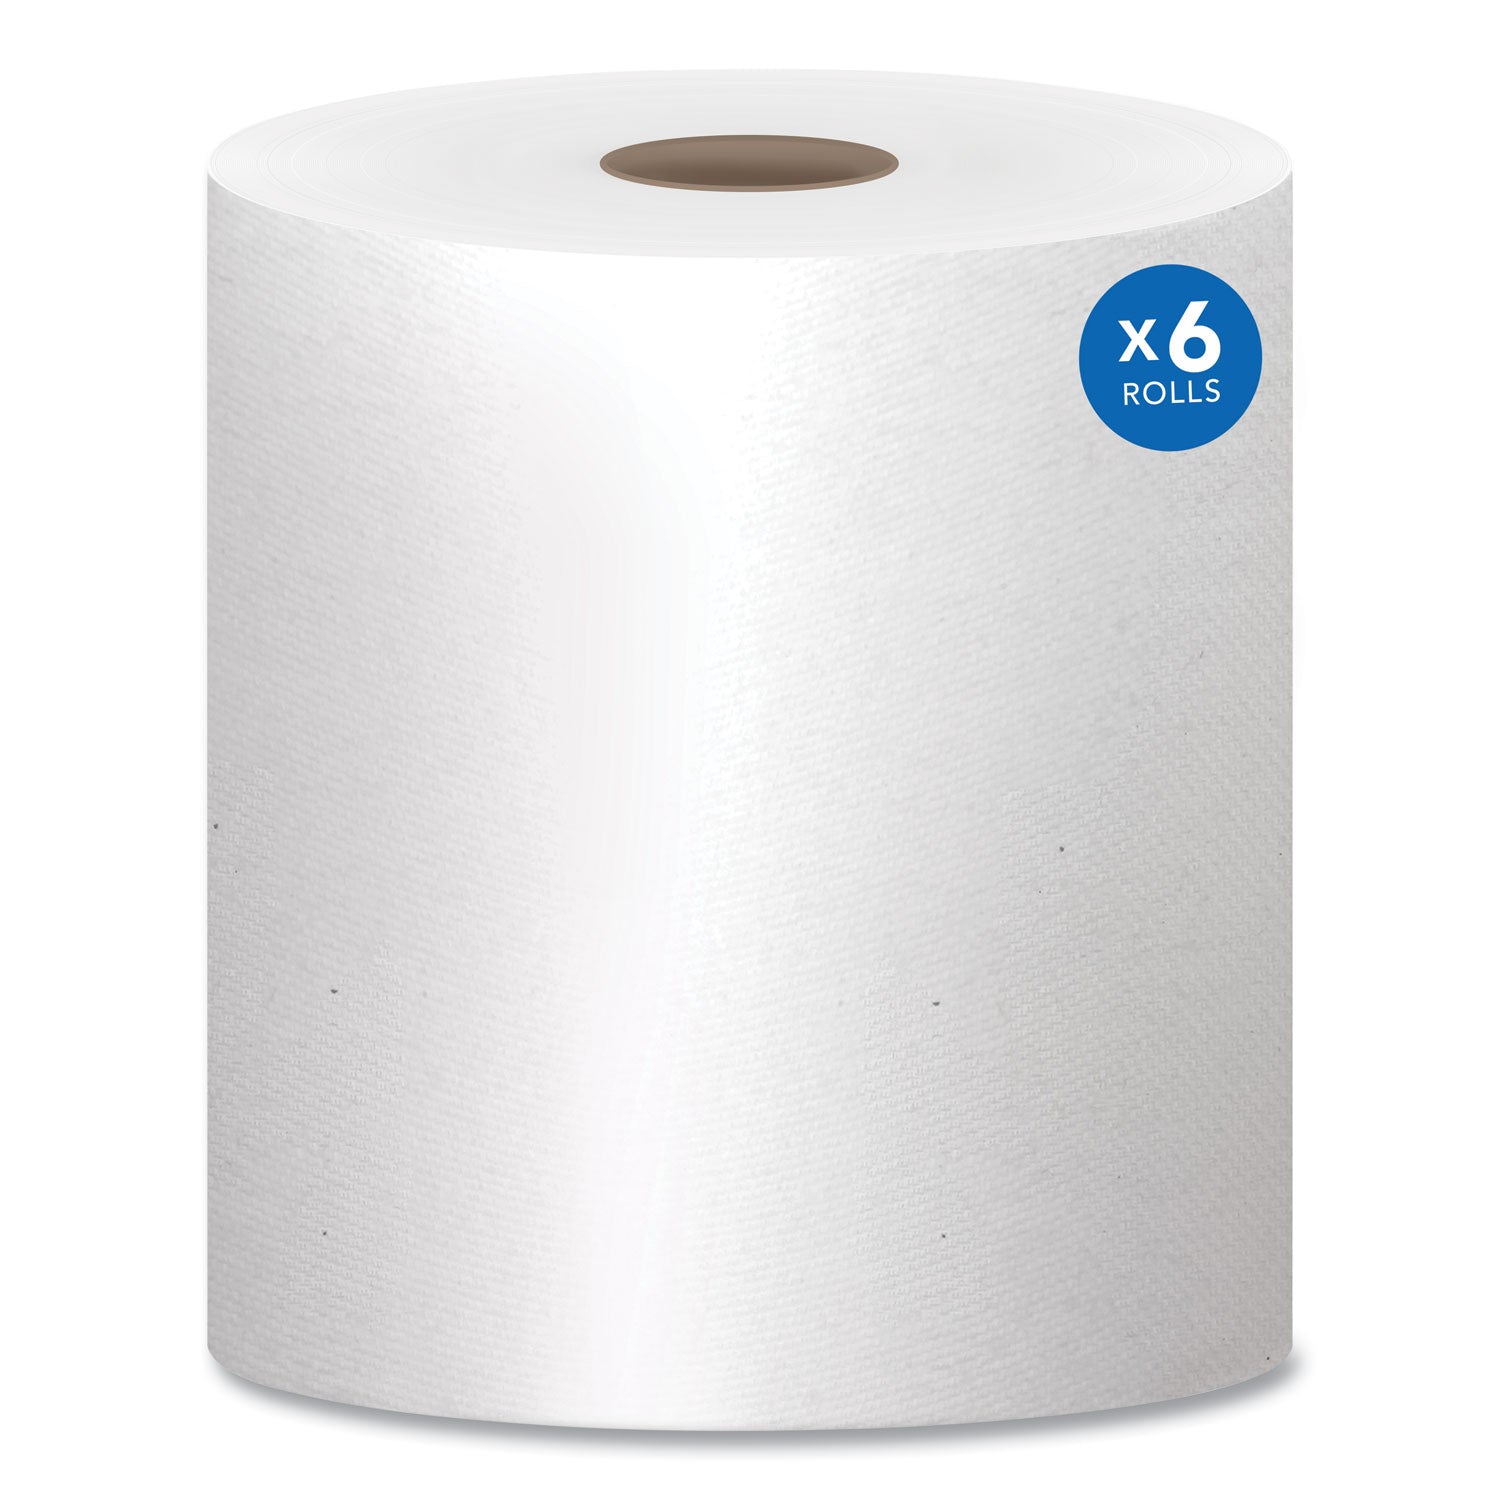 Essential High Capacity Hard Roll Towels for Business, 1-Ply, 8" x 1,000 ft, 1.5" Core, Recycled, White, 6 Rolls/Carton - 